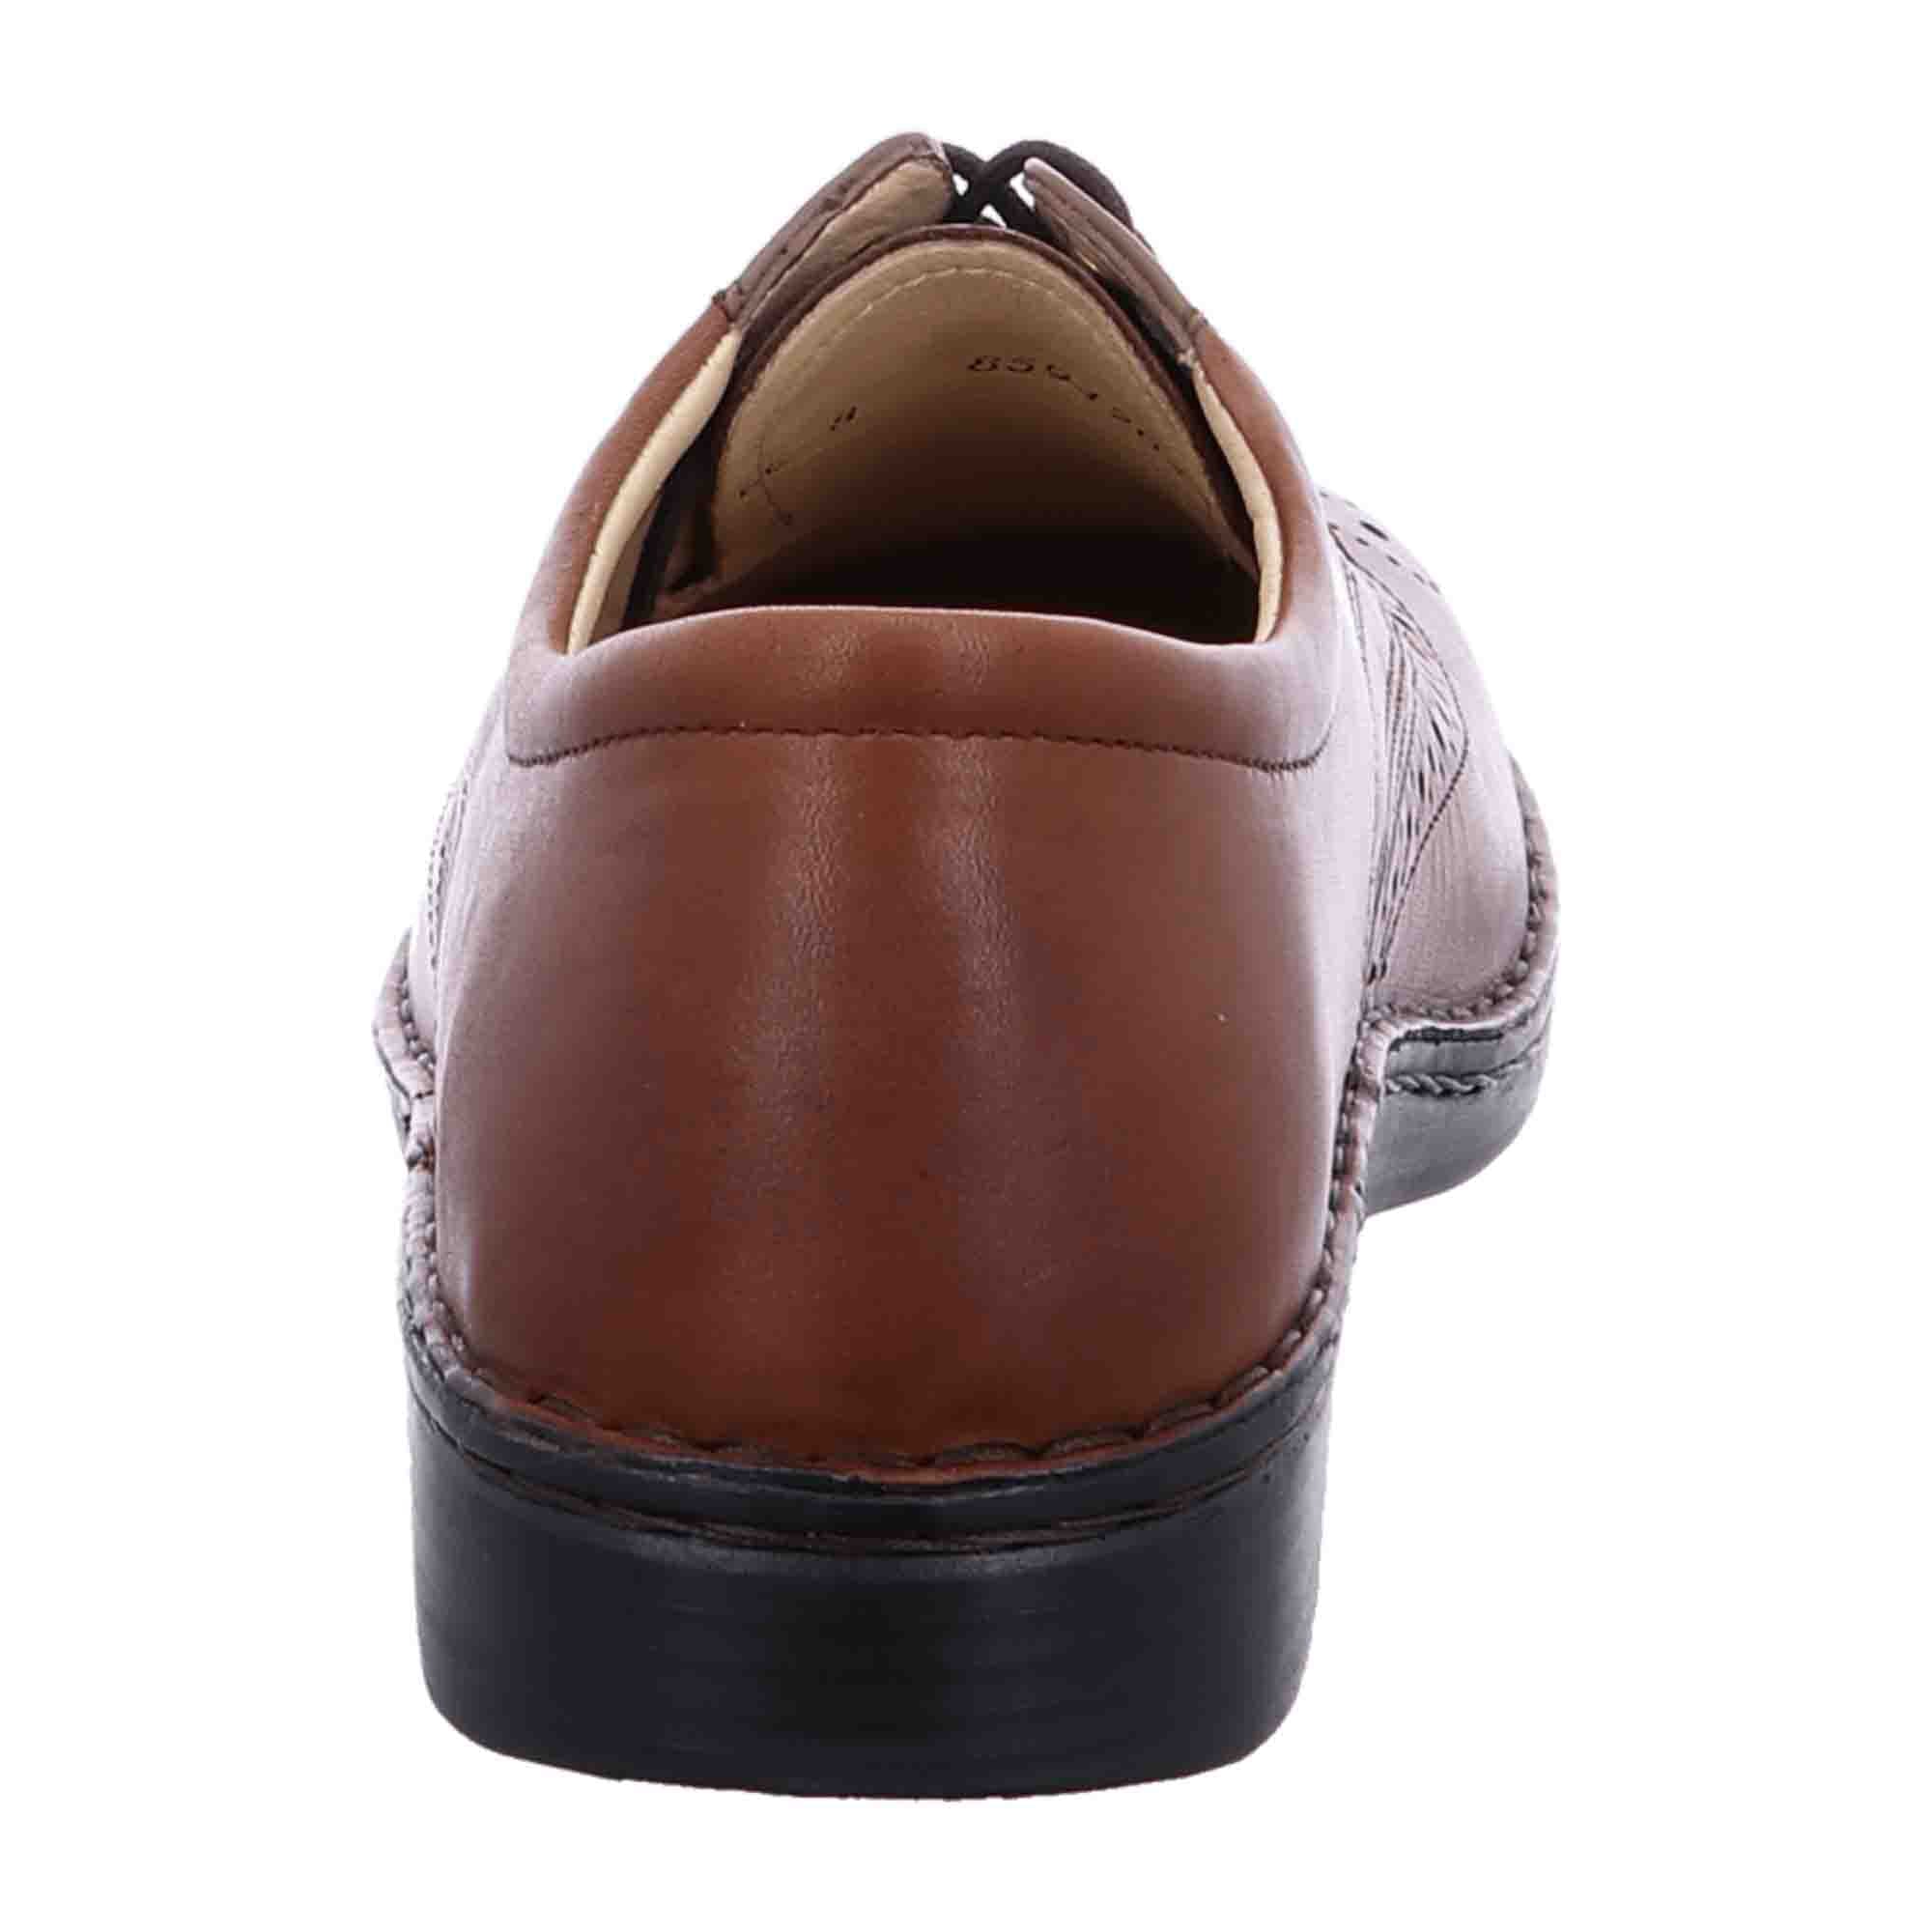 Finn Comfort Budapest Men's Brown Leather Shoes - Durable & Stylish